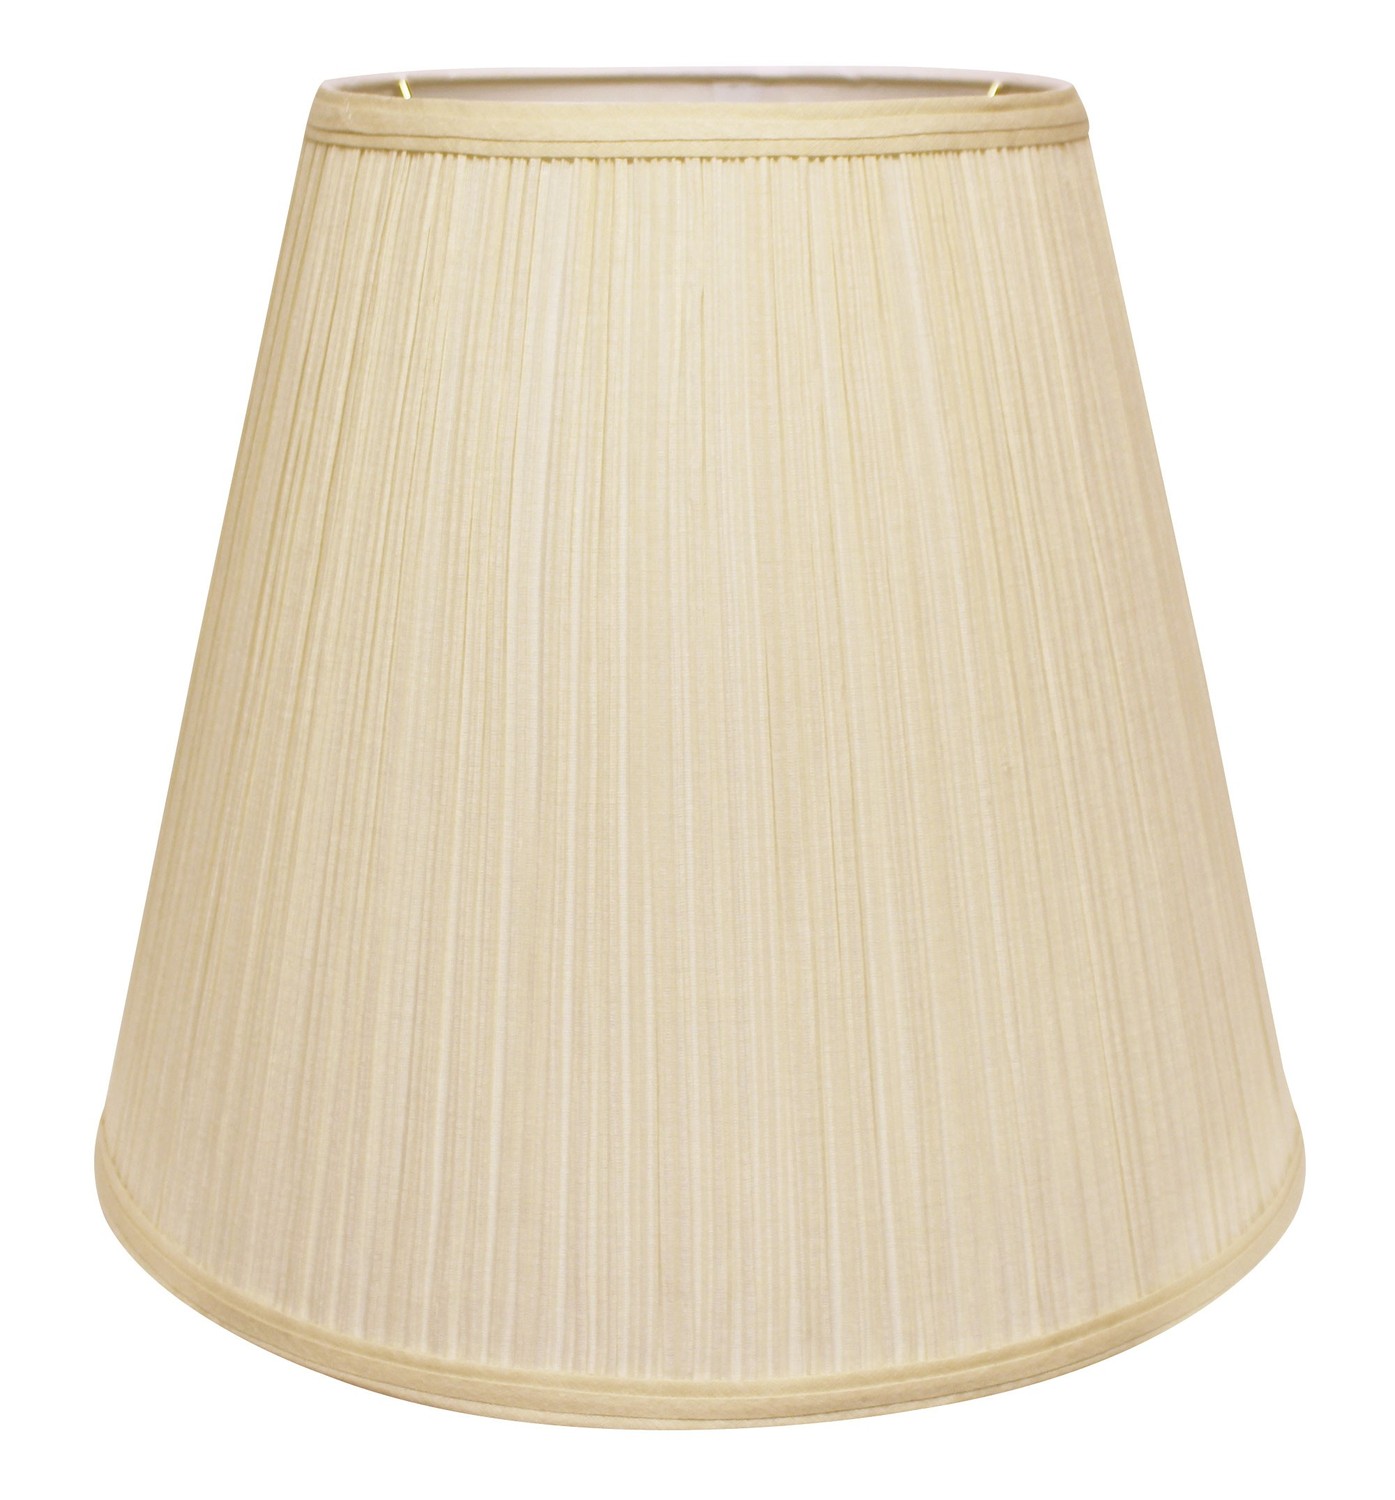 18" Ivory Deep Empire Broadcloth Lampshade